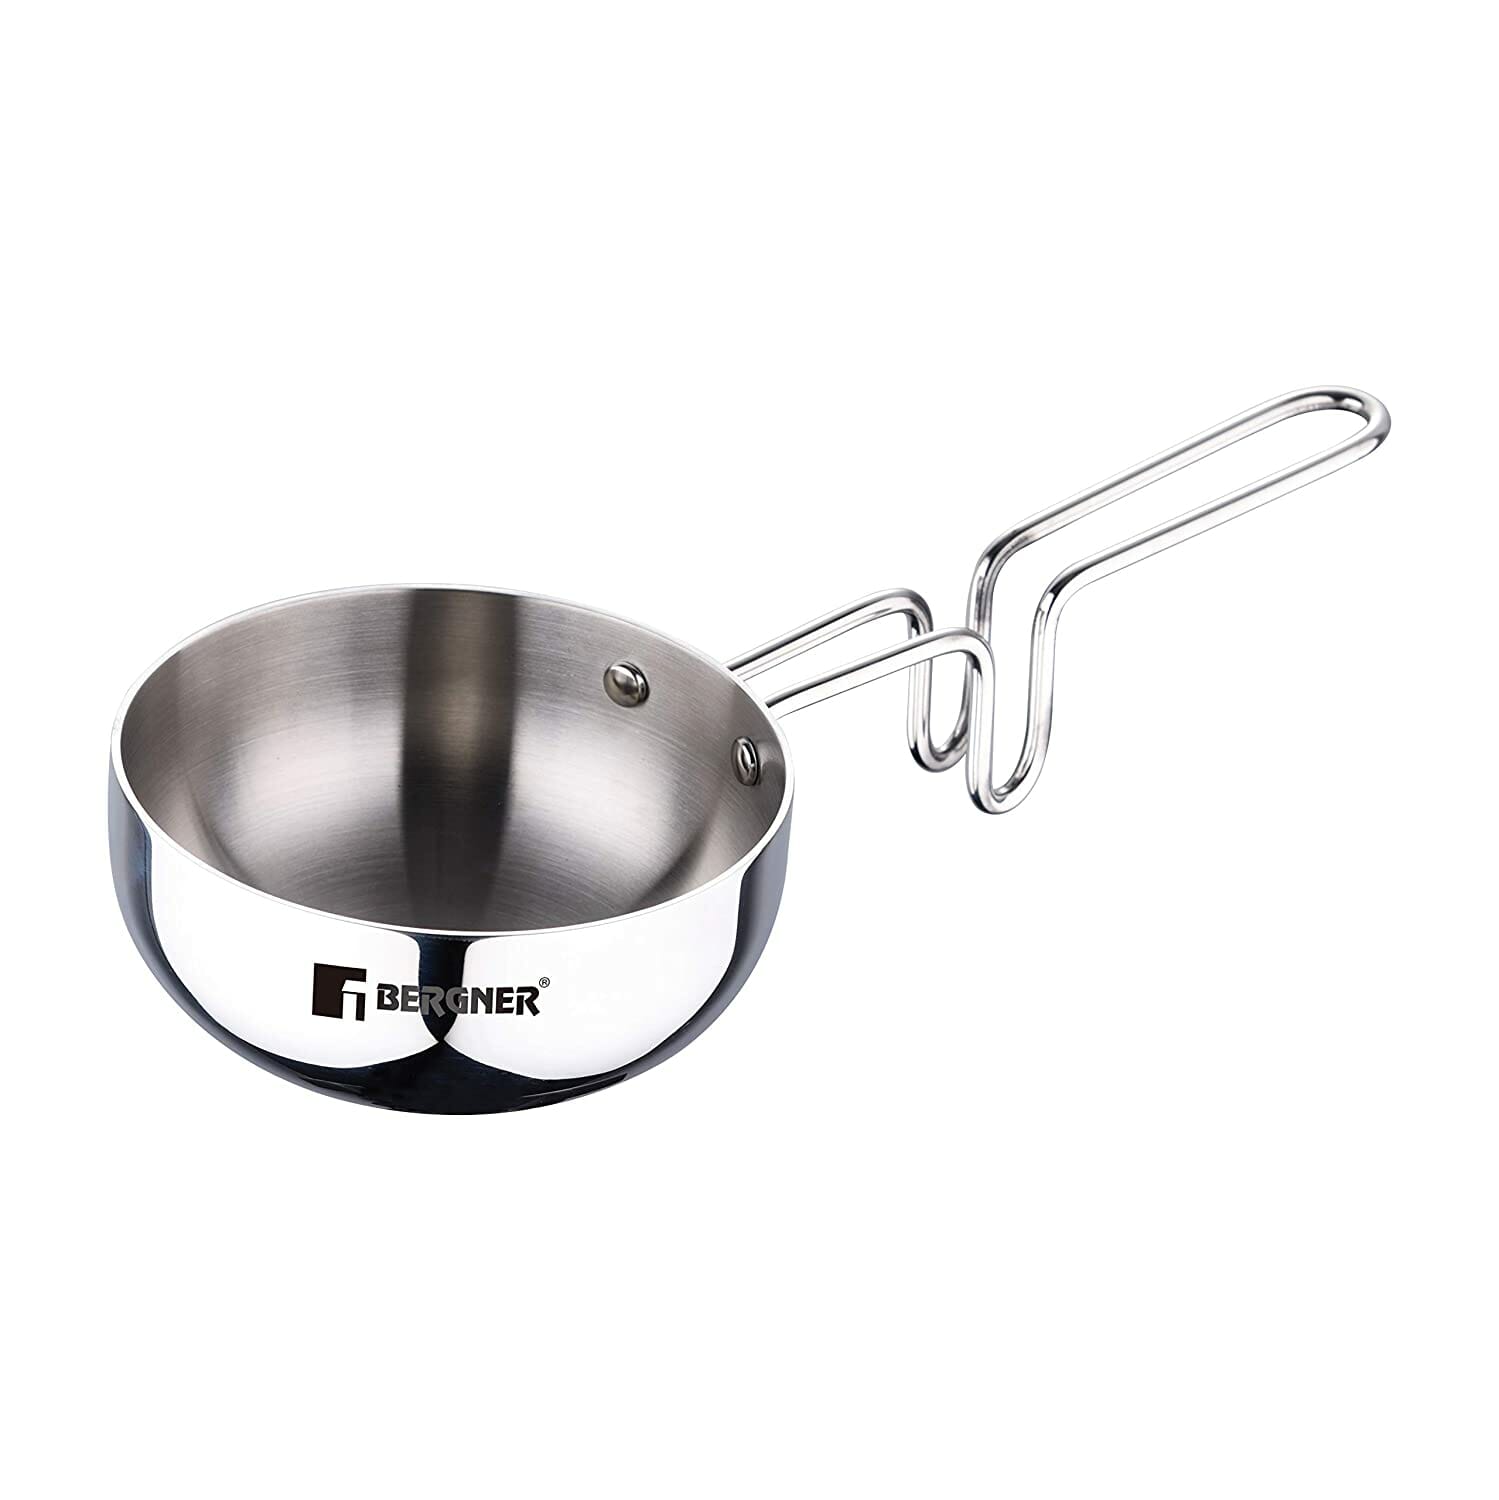 Bergner Tri-Ply Stainless Steel Silver – 12 cm Tadka Pan